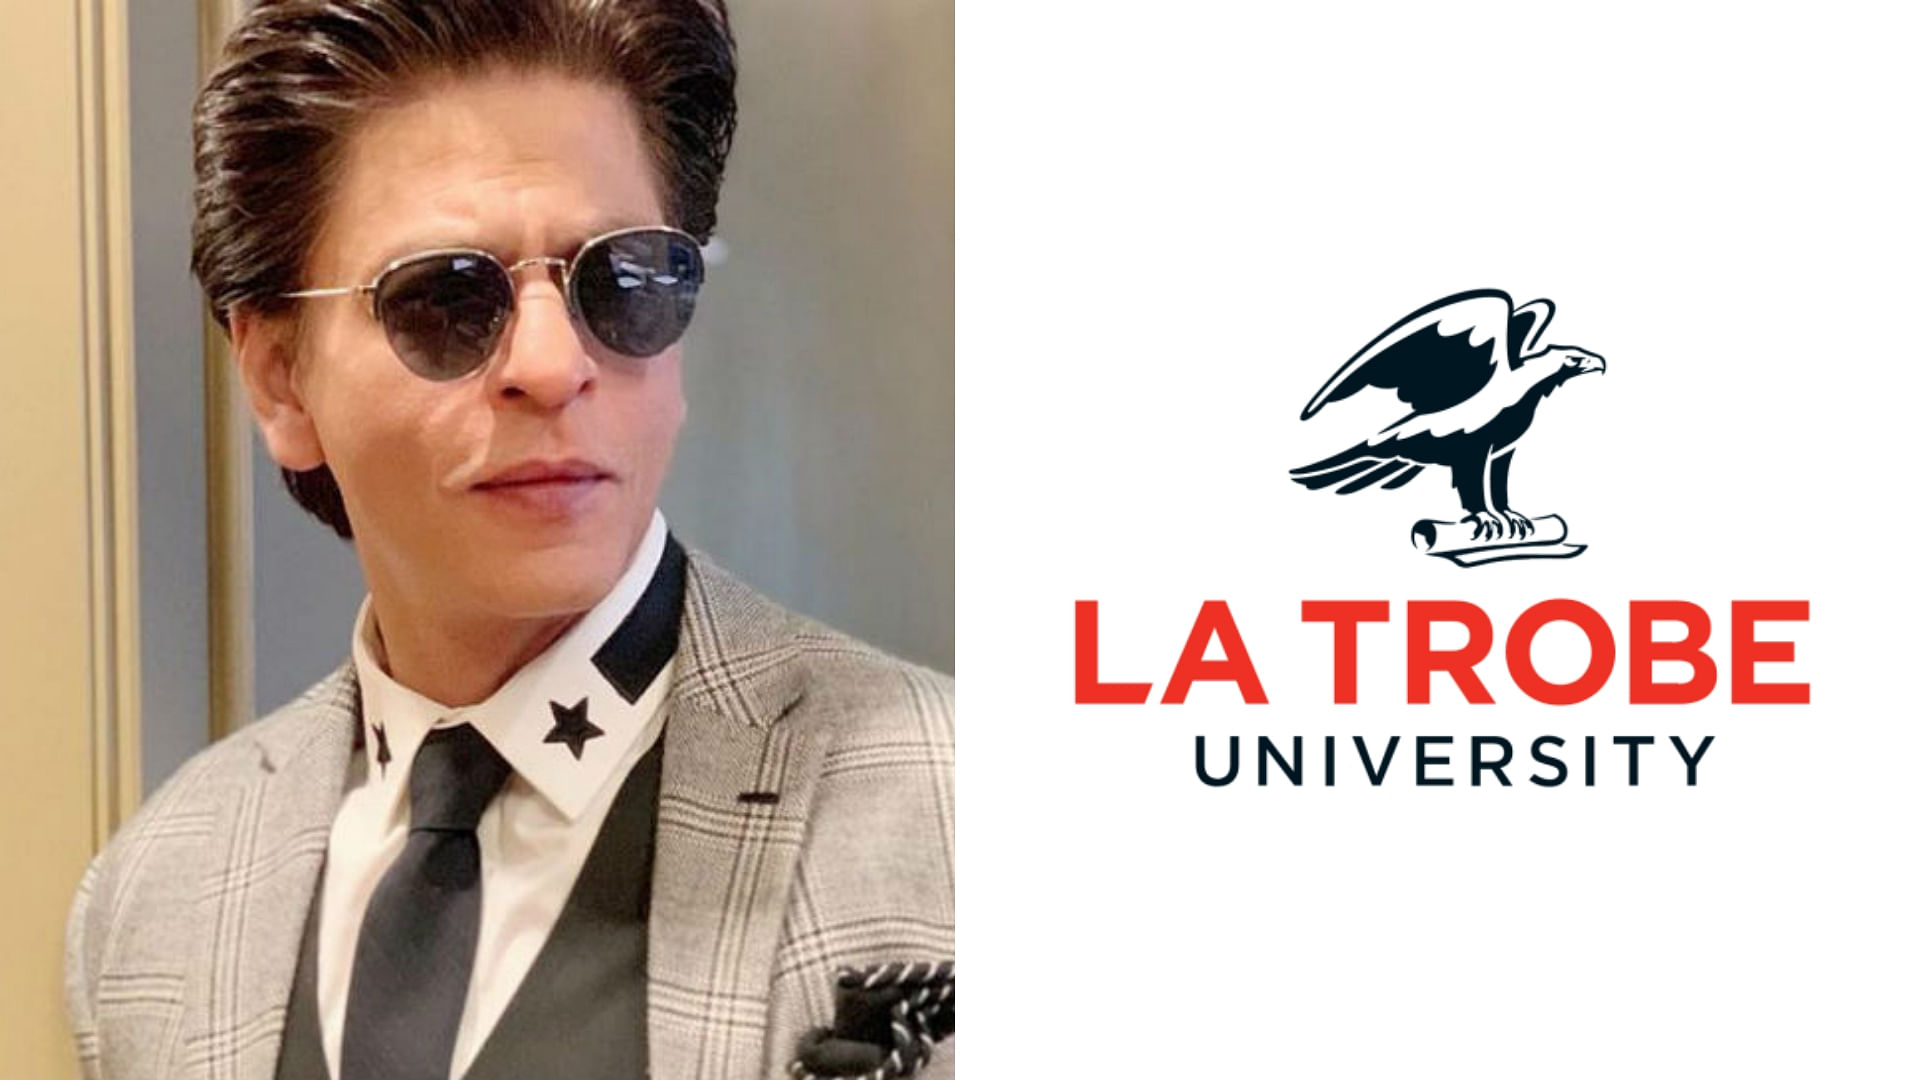 Shah Rukh Khan received an honorary doctorate from La Trobe University.